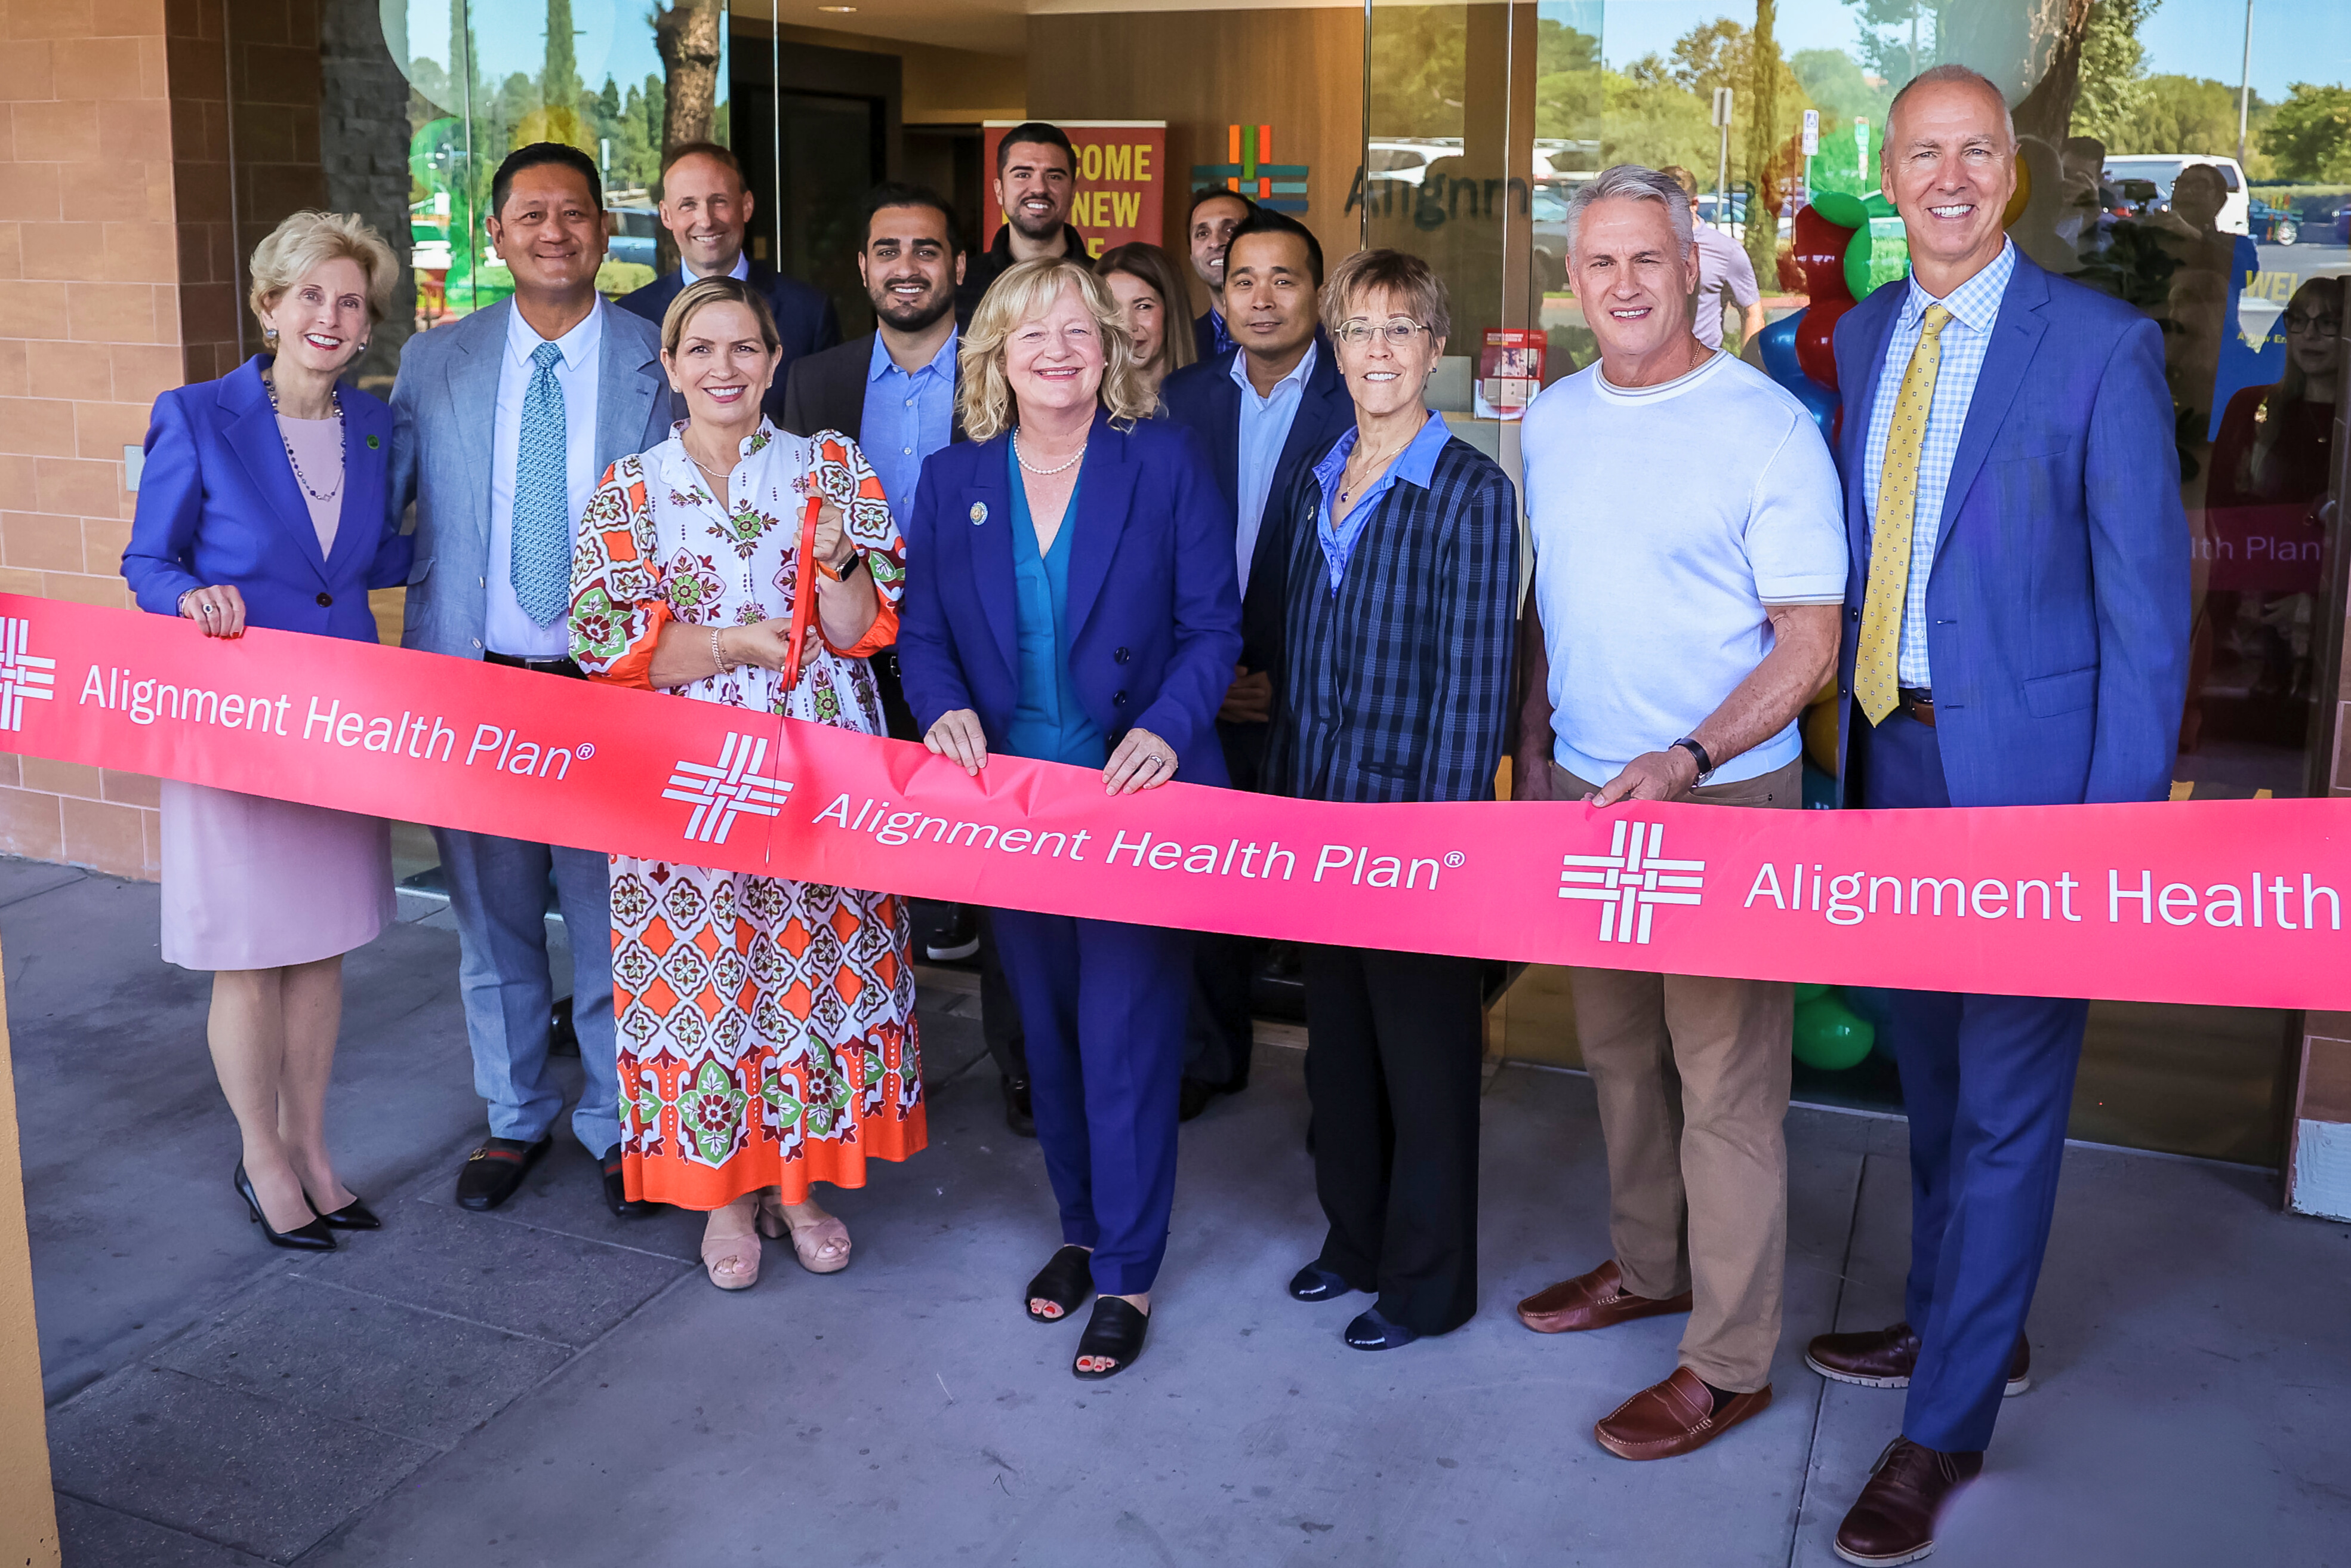 Alignment Health Plan Opens Center in Laguna Woods, CA: Alignment Health celebrates the grand opening of its Alignment Health Plan center in Laguna Woods with elected officials welcoming community members at a ribbon-cutting ceremony for the senior-focused facility on Oct. 3, 2023.